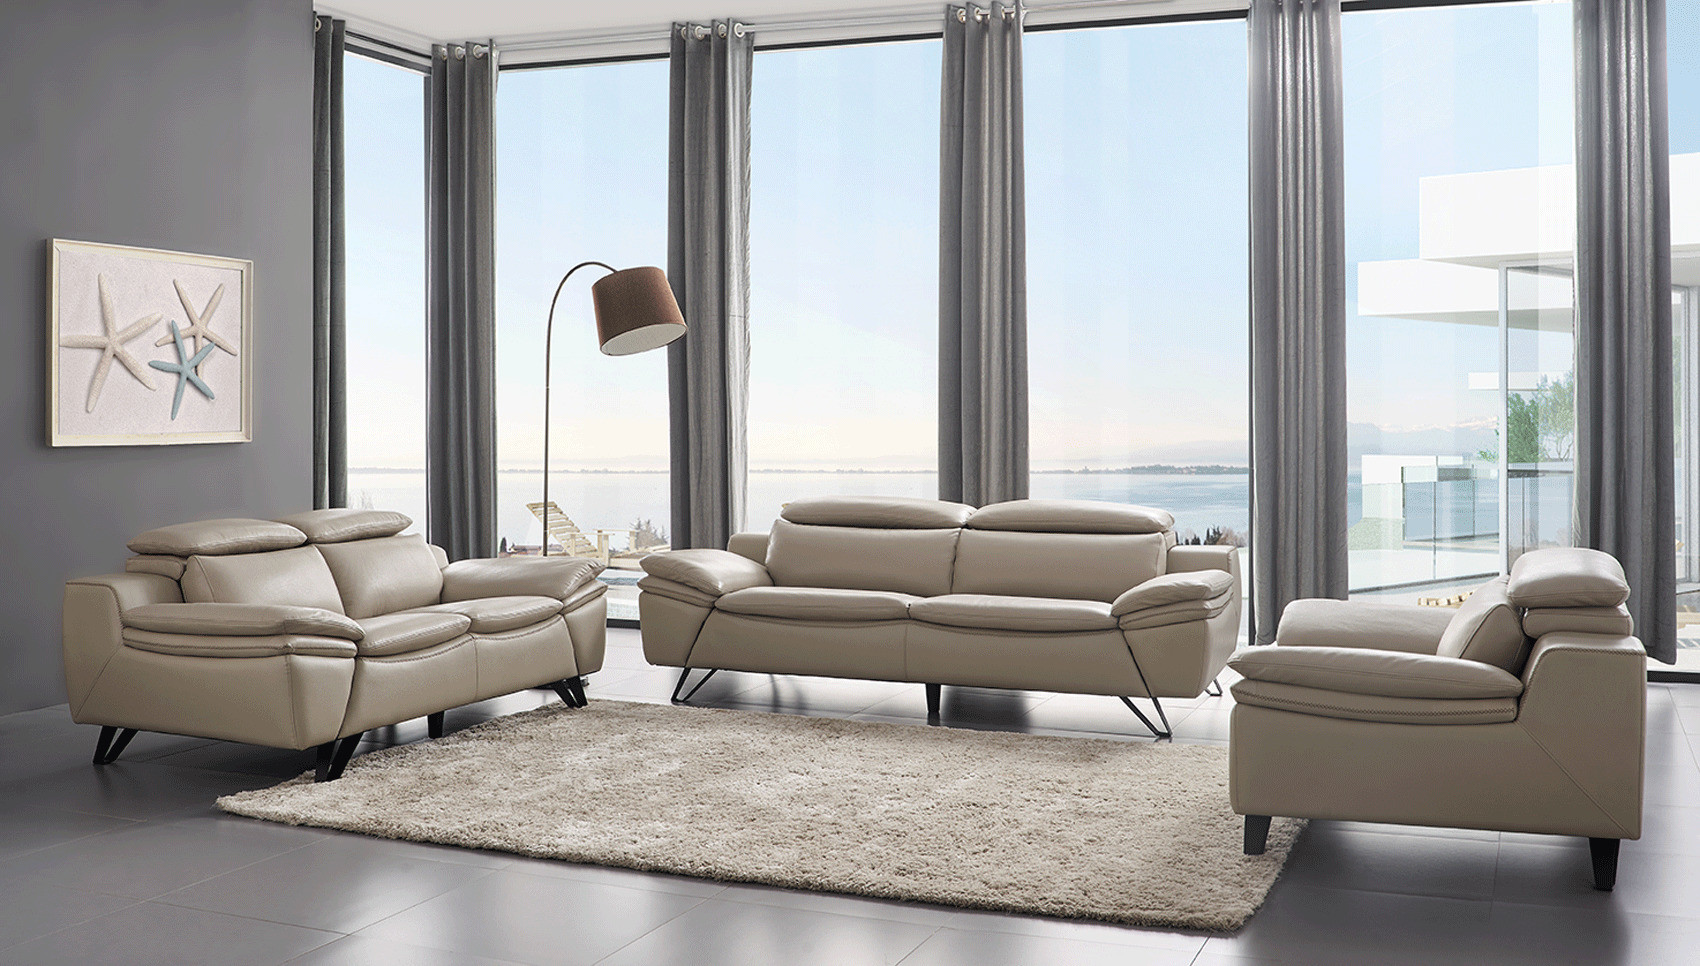 Modern Living Room Furniture Sets
 Grey Leather Contemporary Living Room Set Cleveland Ohio